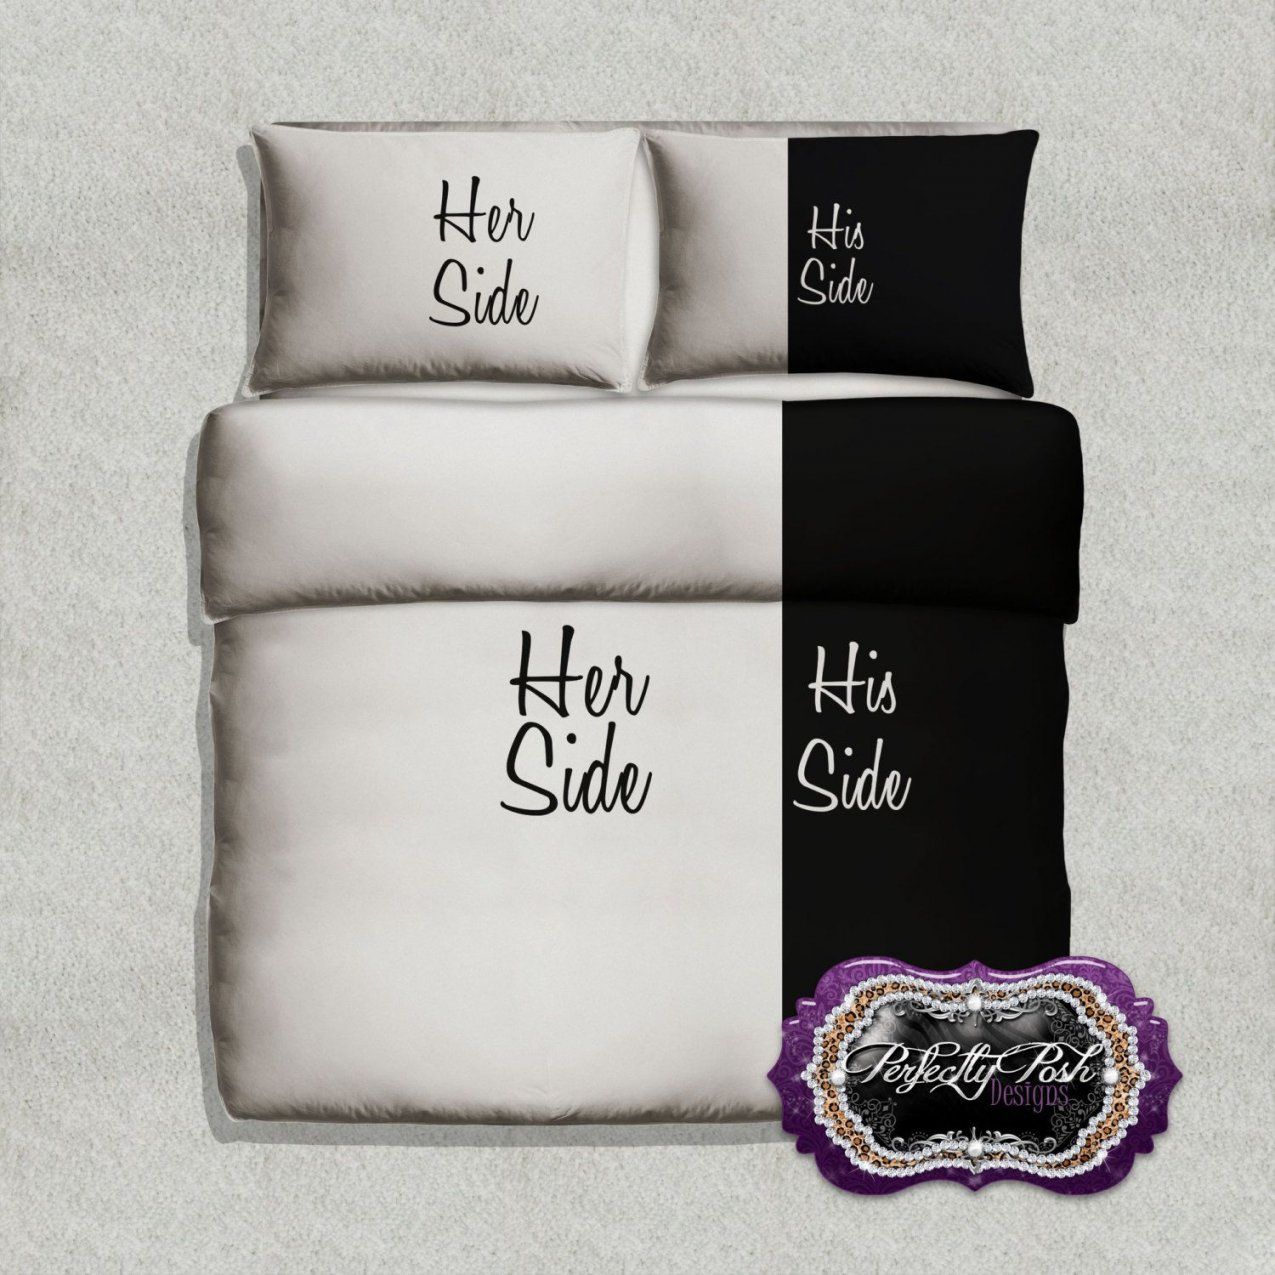 His Side And Her Side Bedding Custom Design And Personalized von Bettwäsche Her Side His Side Photo